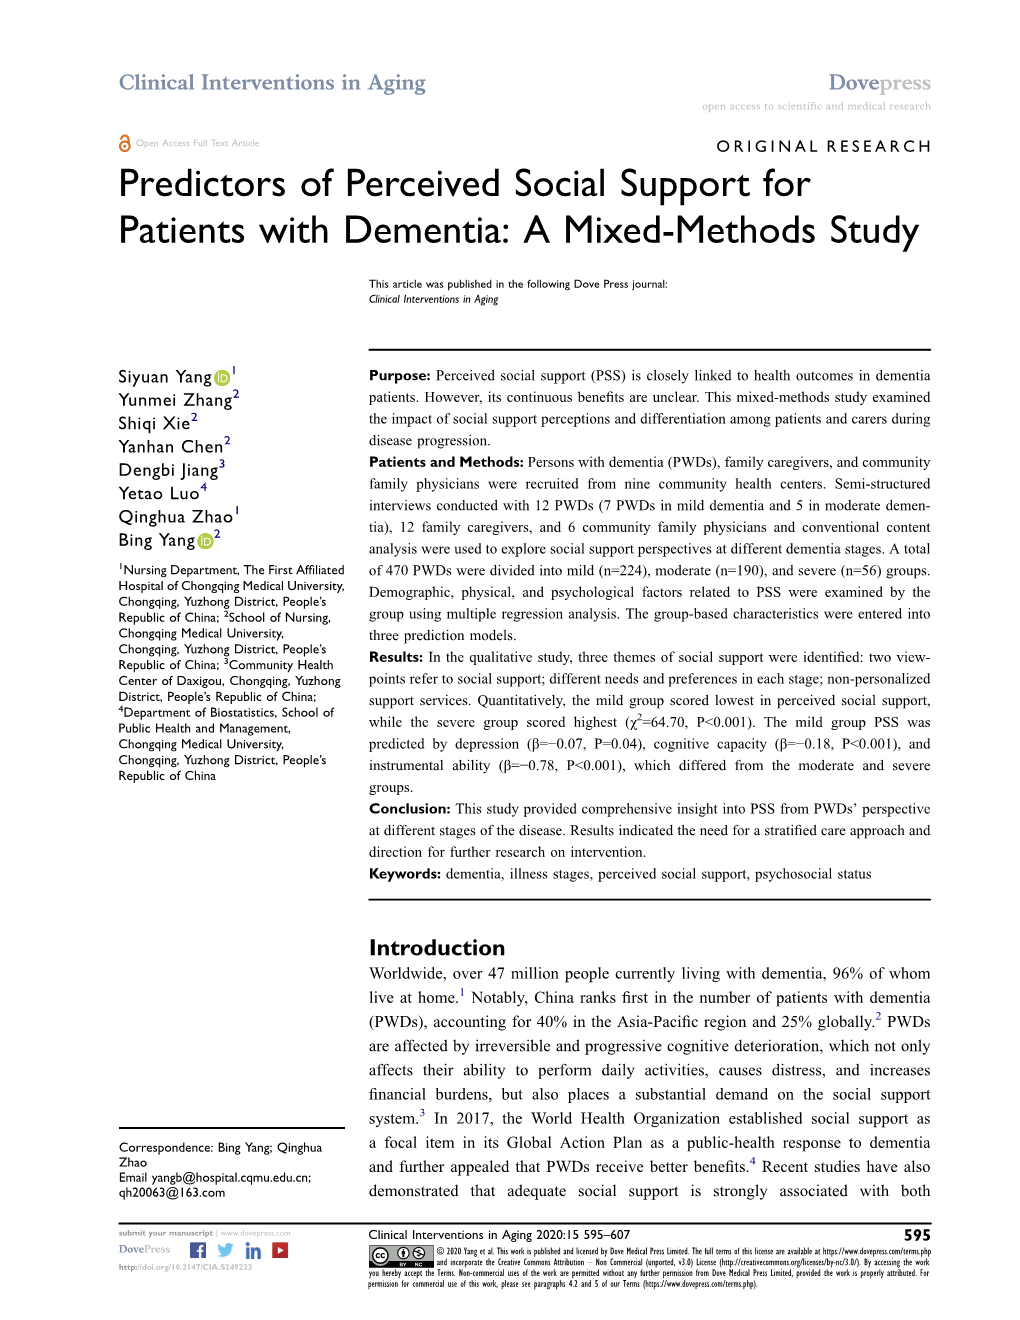 Predictors of Perceived Social Support for Patients with Dementia: a Mixed-Methods Study